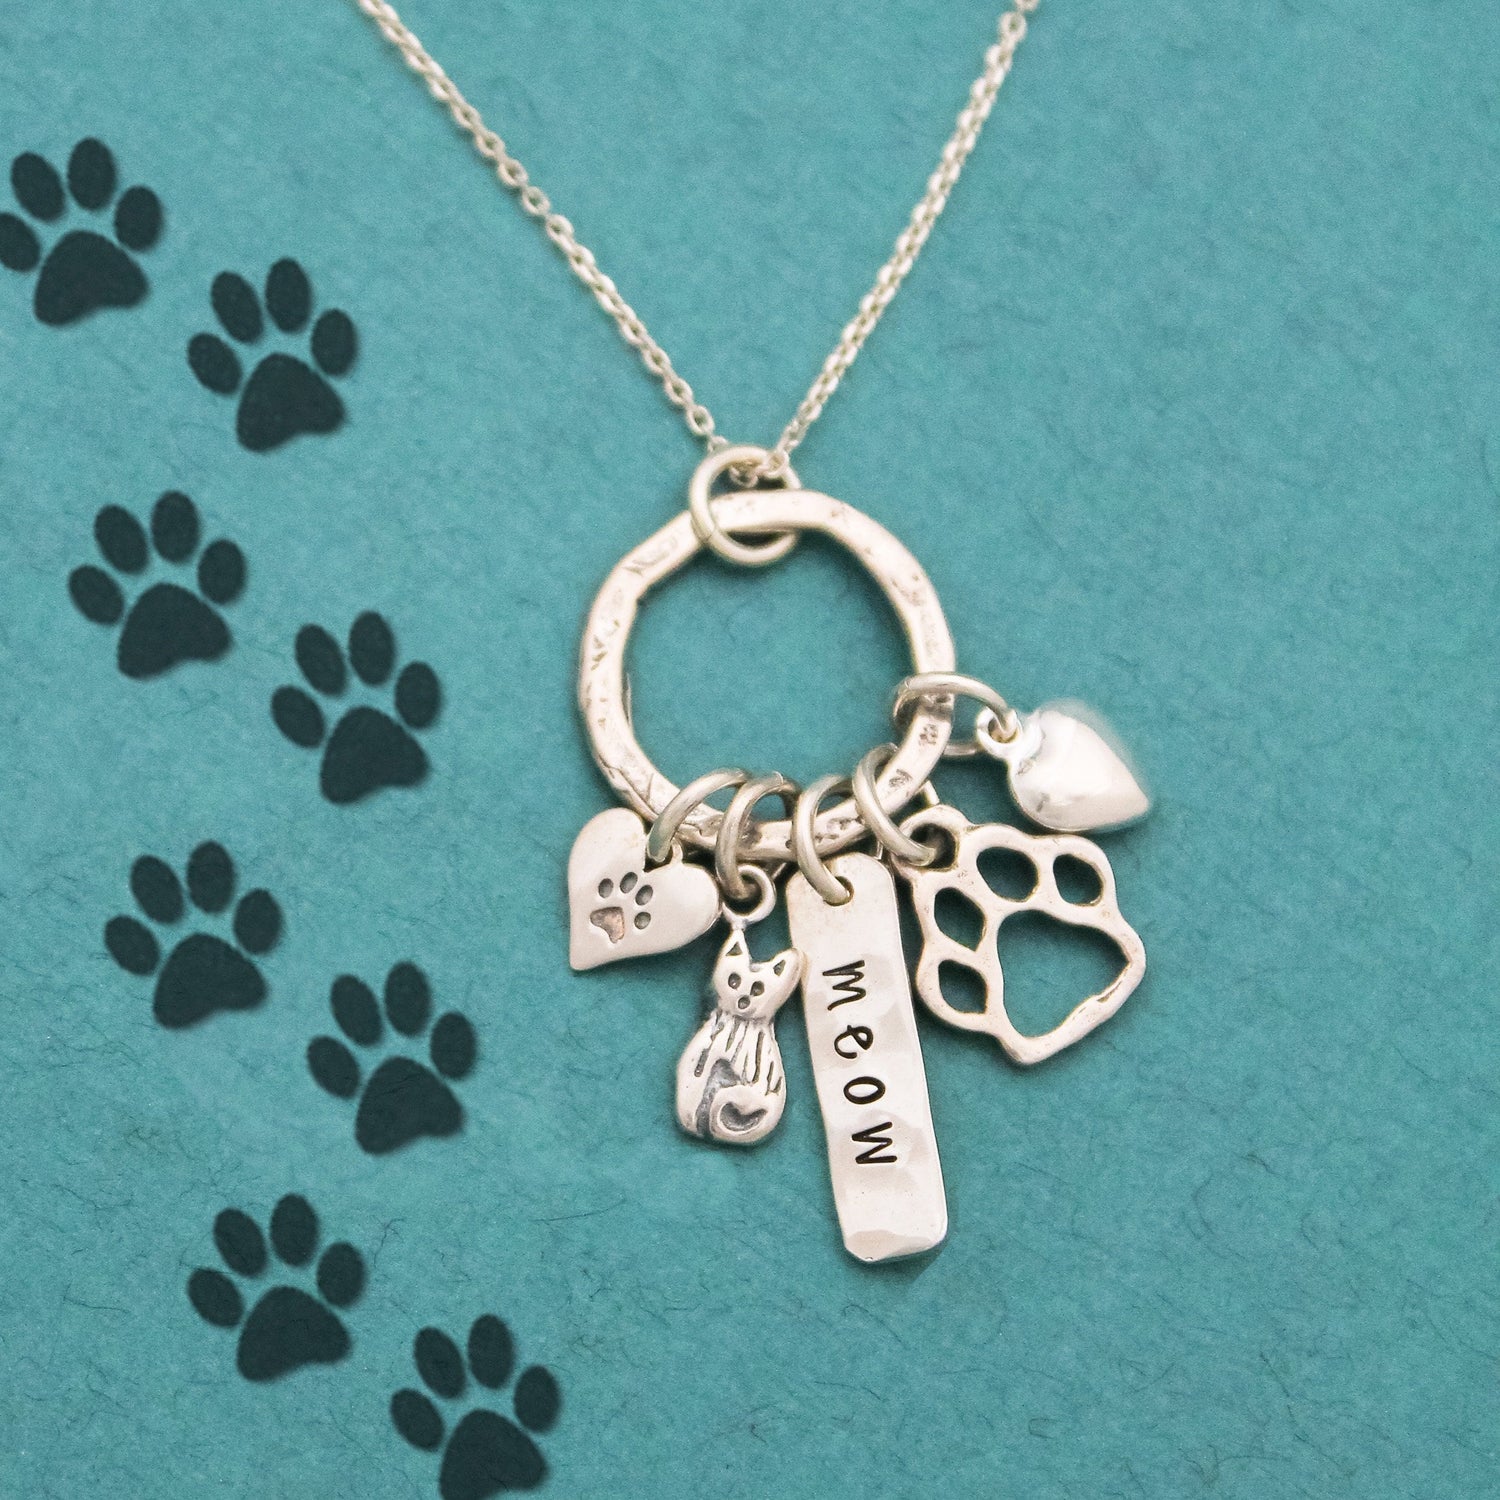 Meow Cat Necklace, Cat Lovers Necklace, Cat Paw Print Meow Gift, Cat Jewelry, Paw Print Jewelry, Cat Lady Gift, Kitty Gift, Cat Lover Gift